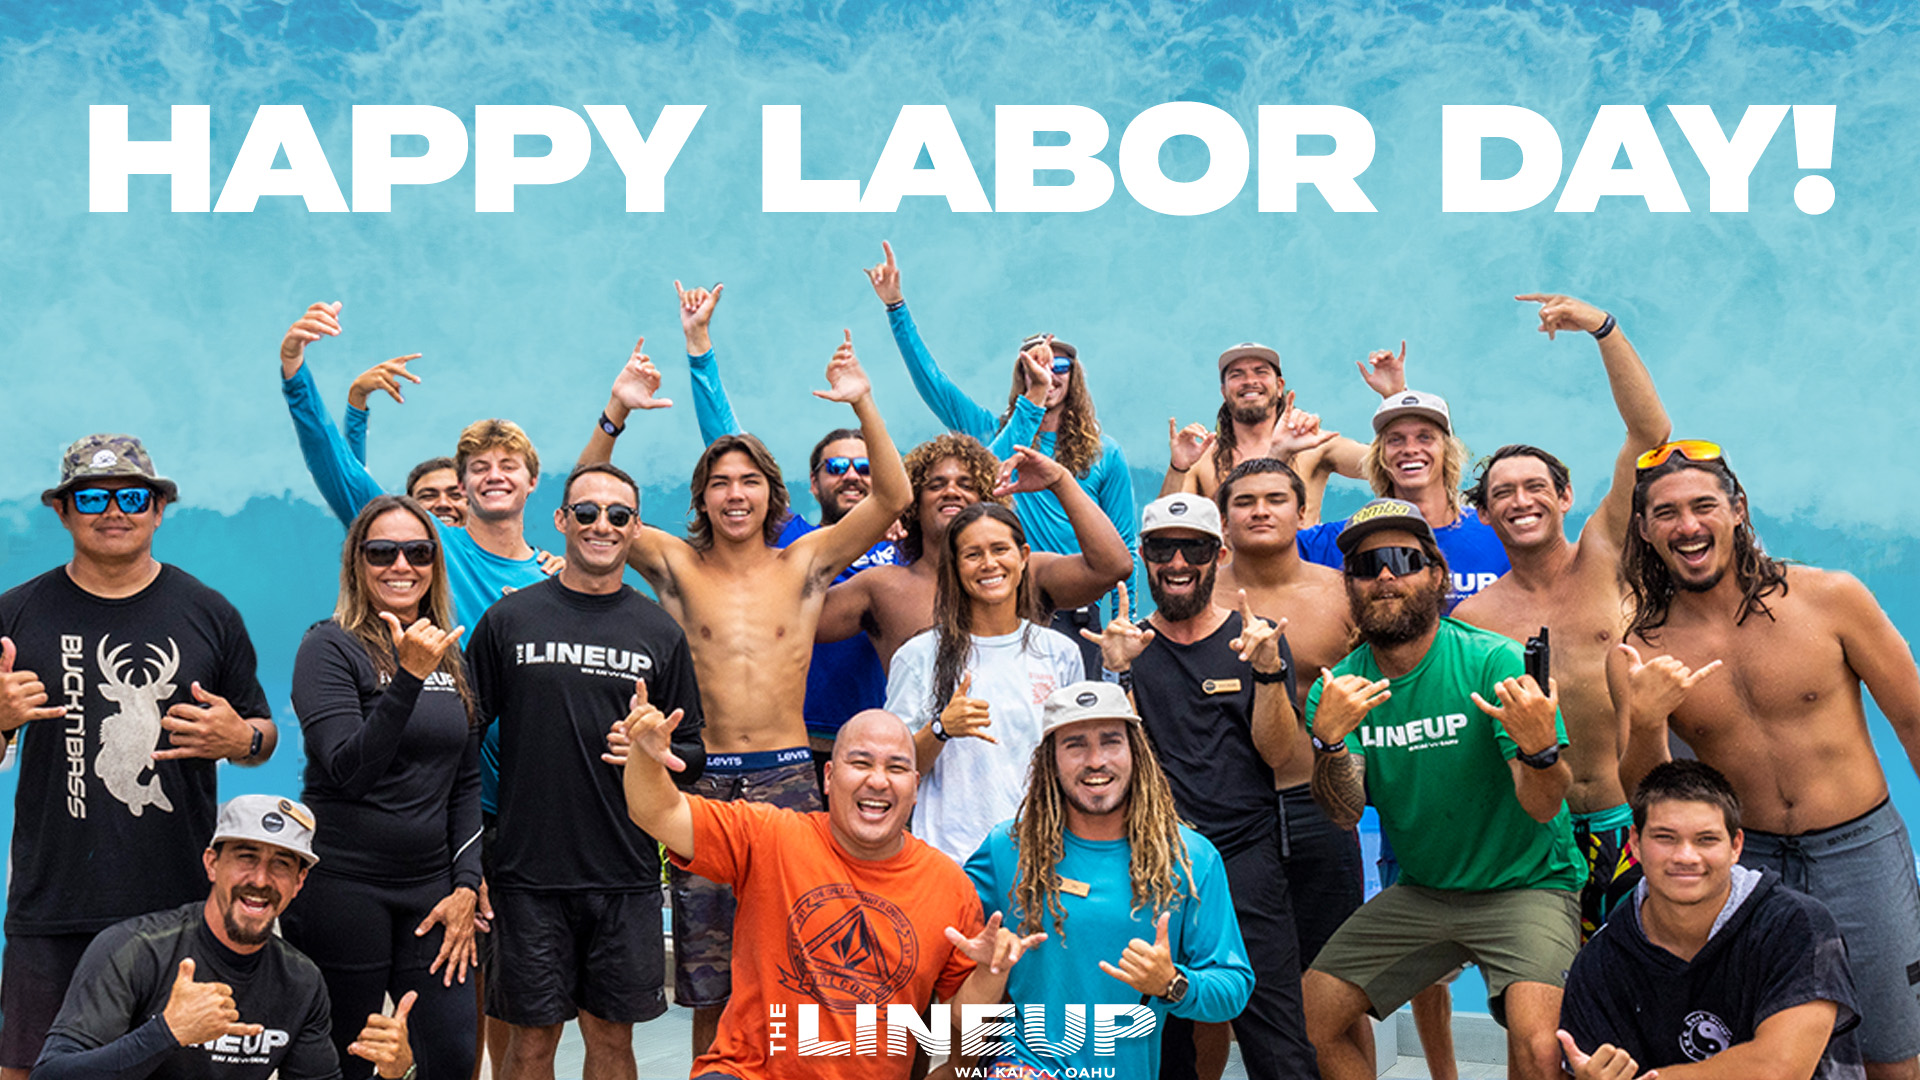 Celebrate Labor Day Weekend at The LineUp! The Lookout